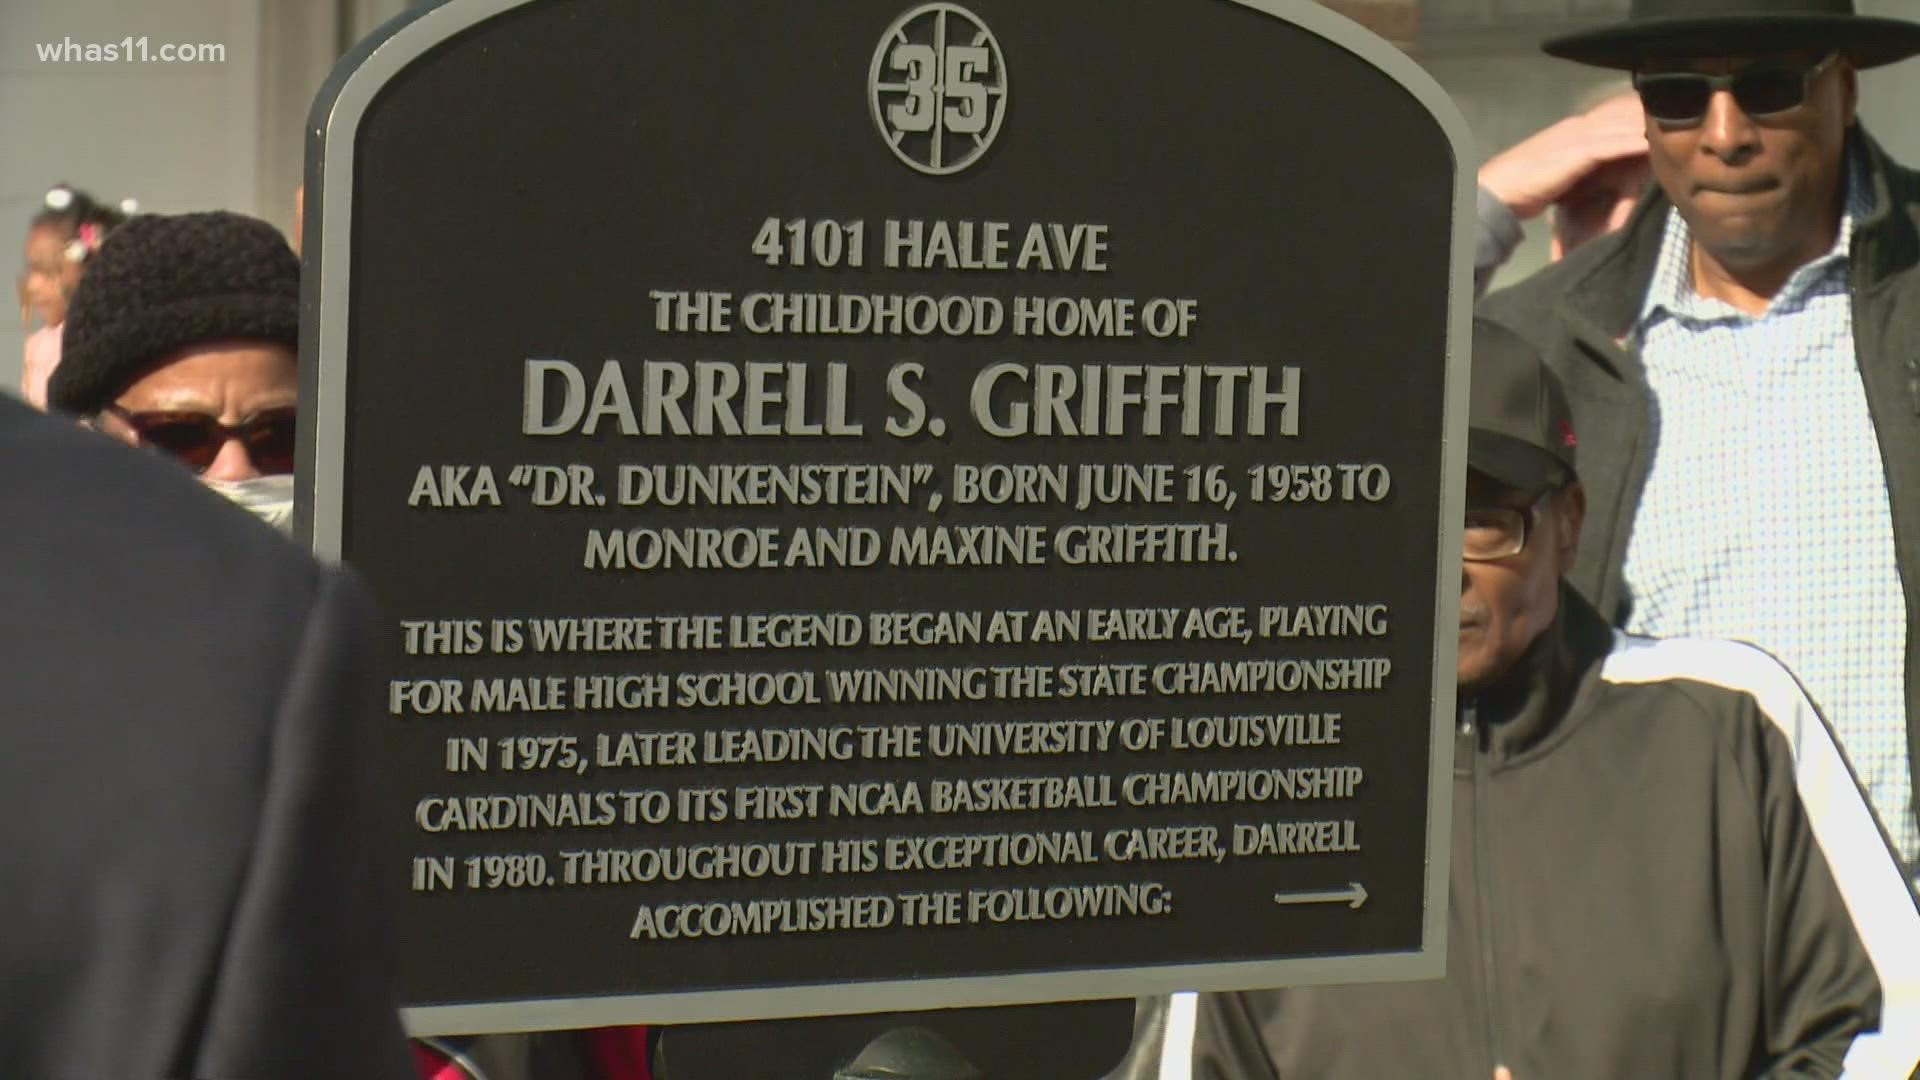 After becoming an NBA star Darrell Griffith gave back through the Darrell Griffith foundation. and is a founding board member of the West End School.